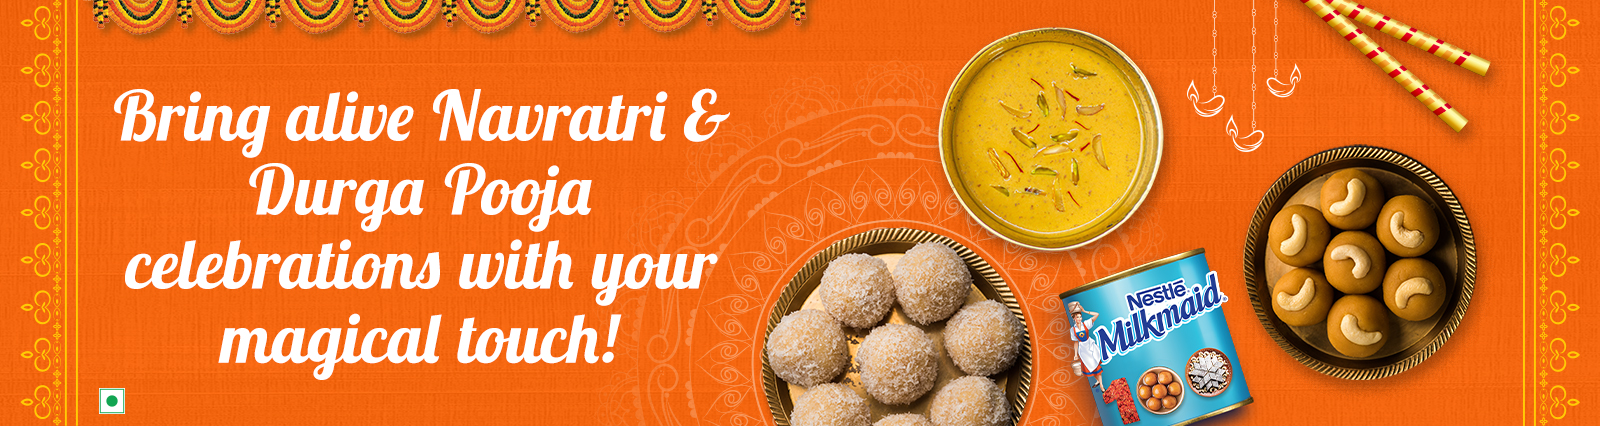 Navratri and Durga Puja special recipes to try at home!